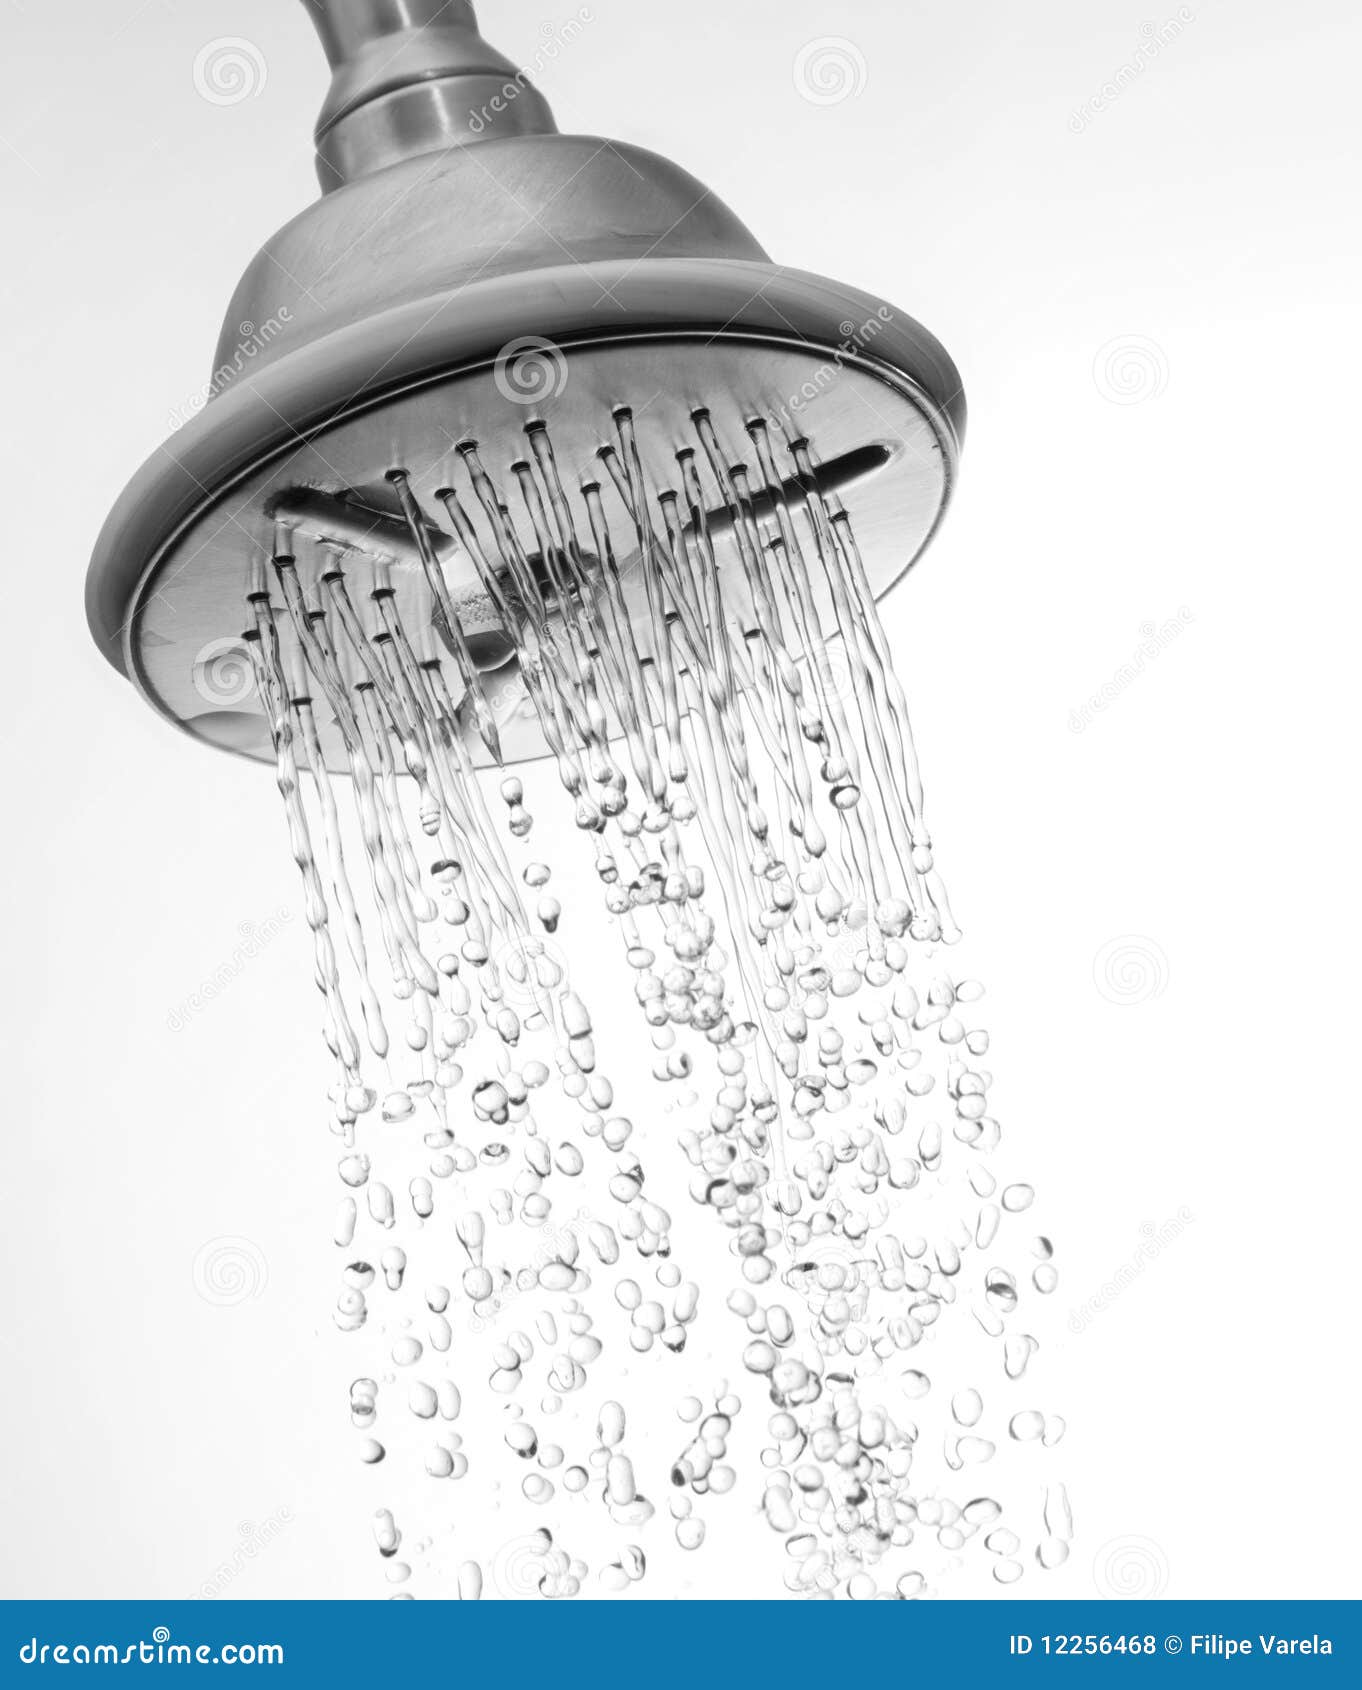 water flowing in the shower